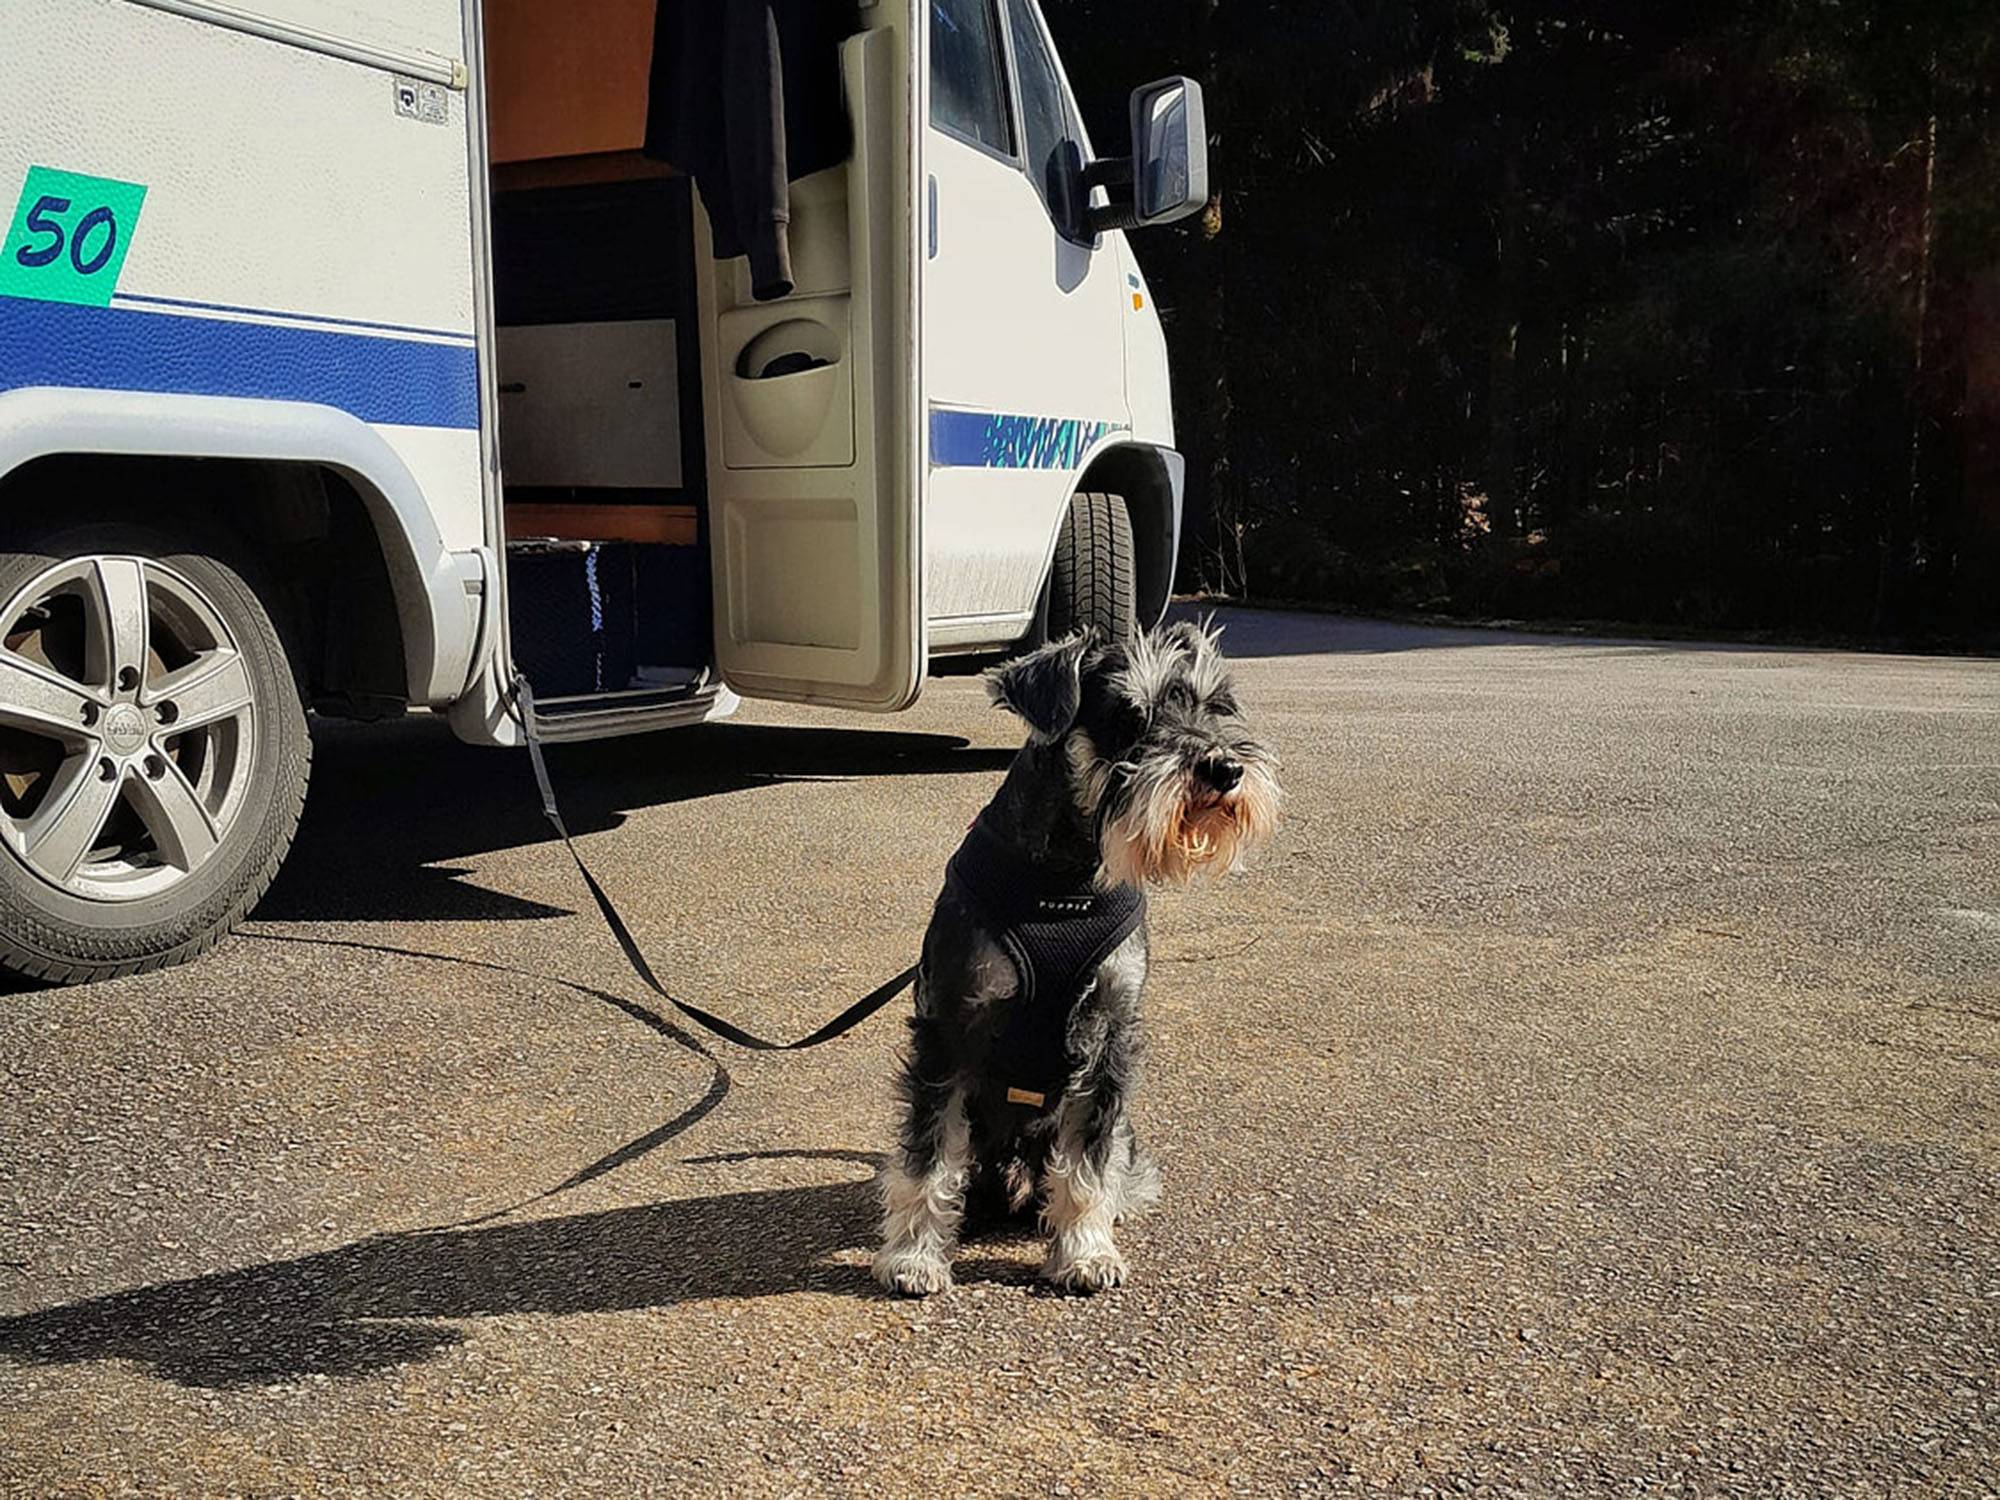 A Journey of Resilience: Embracing the Road with my RV